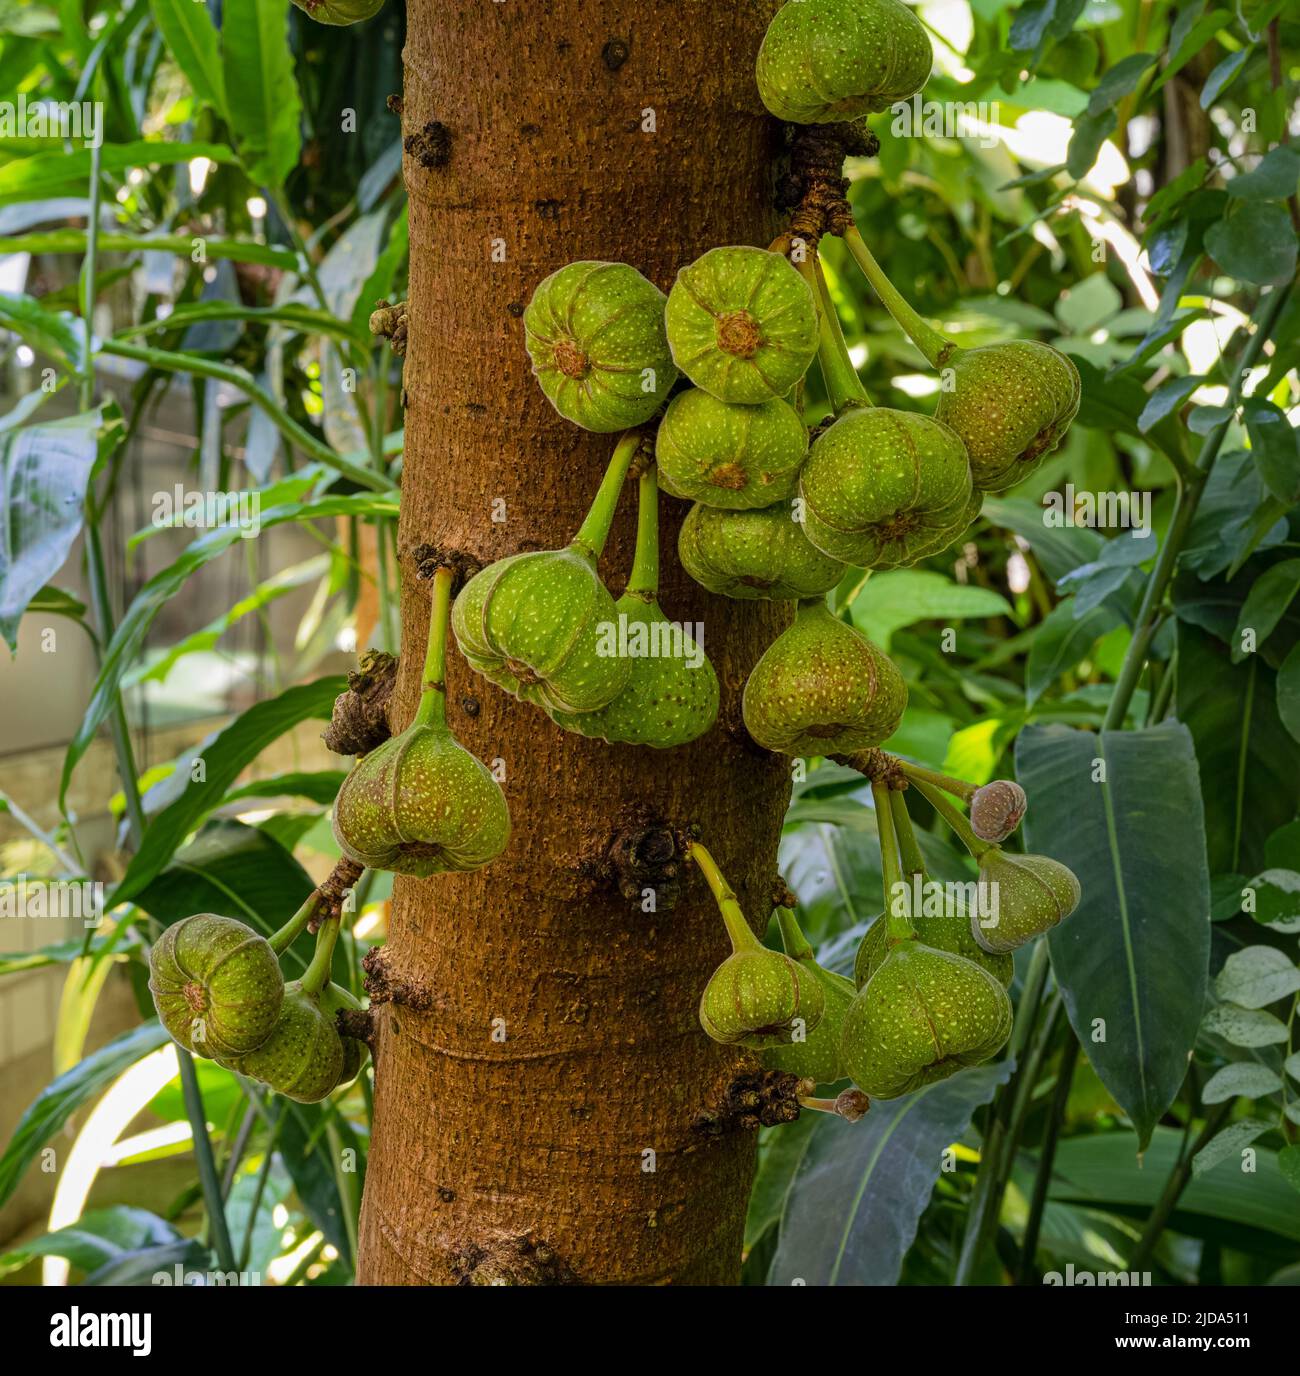 Ficus auriculata, Roxburgh Fig close_up of fruits on a tree. Stock Photo